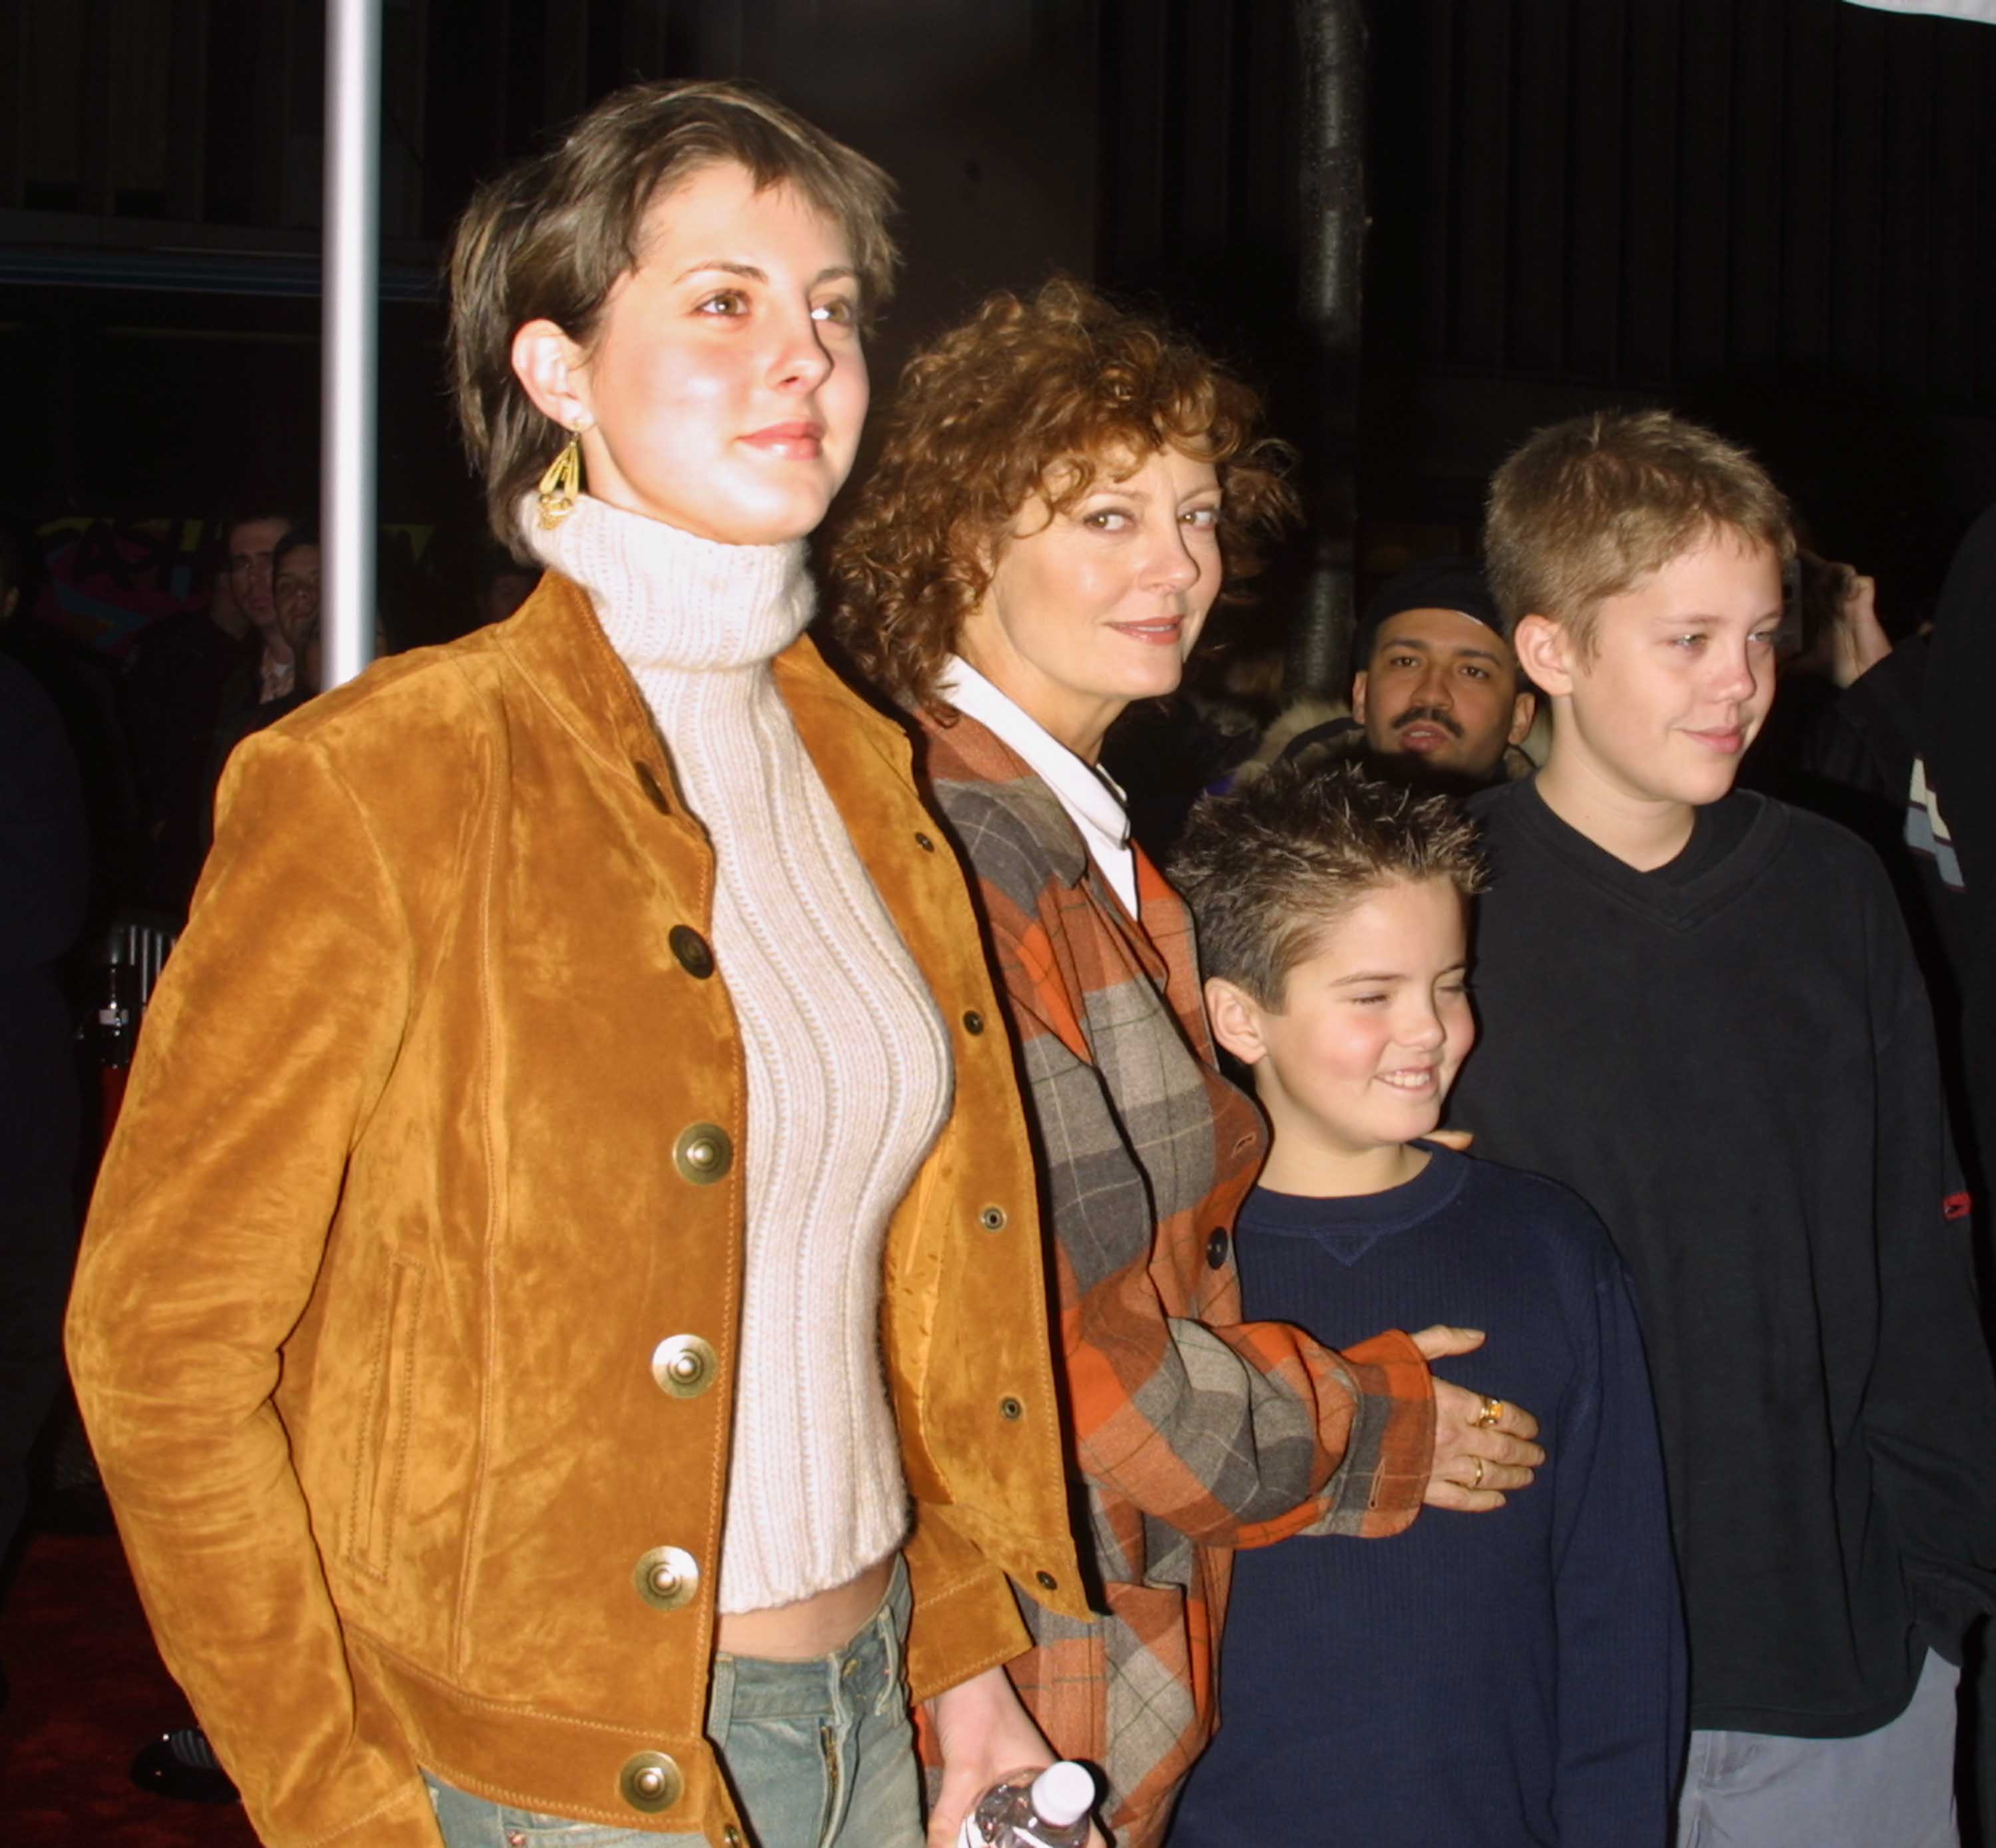 Eva Amurri, Susan Sarandon, Miles Robbins, and Jack Henry Robbins at the premiere of "The Lord Of The Rings" in New York City in 2001 | Source: Getty Images